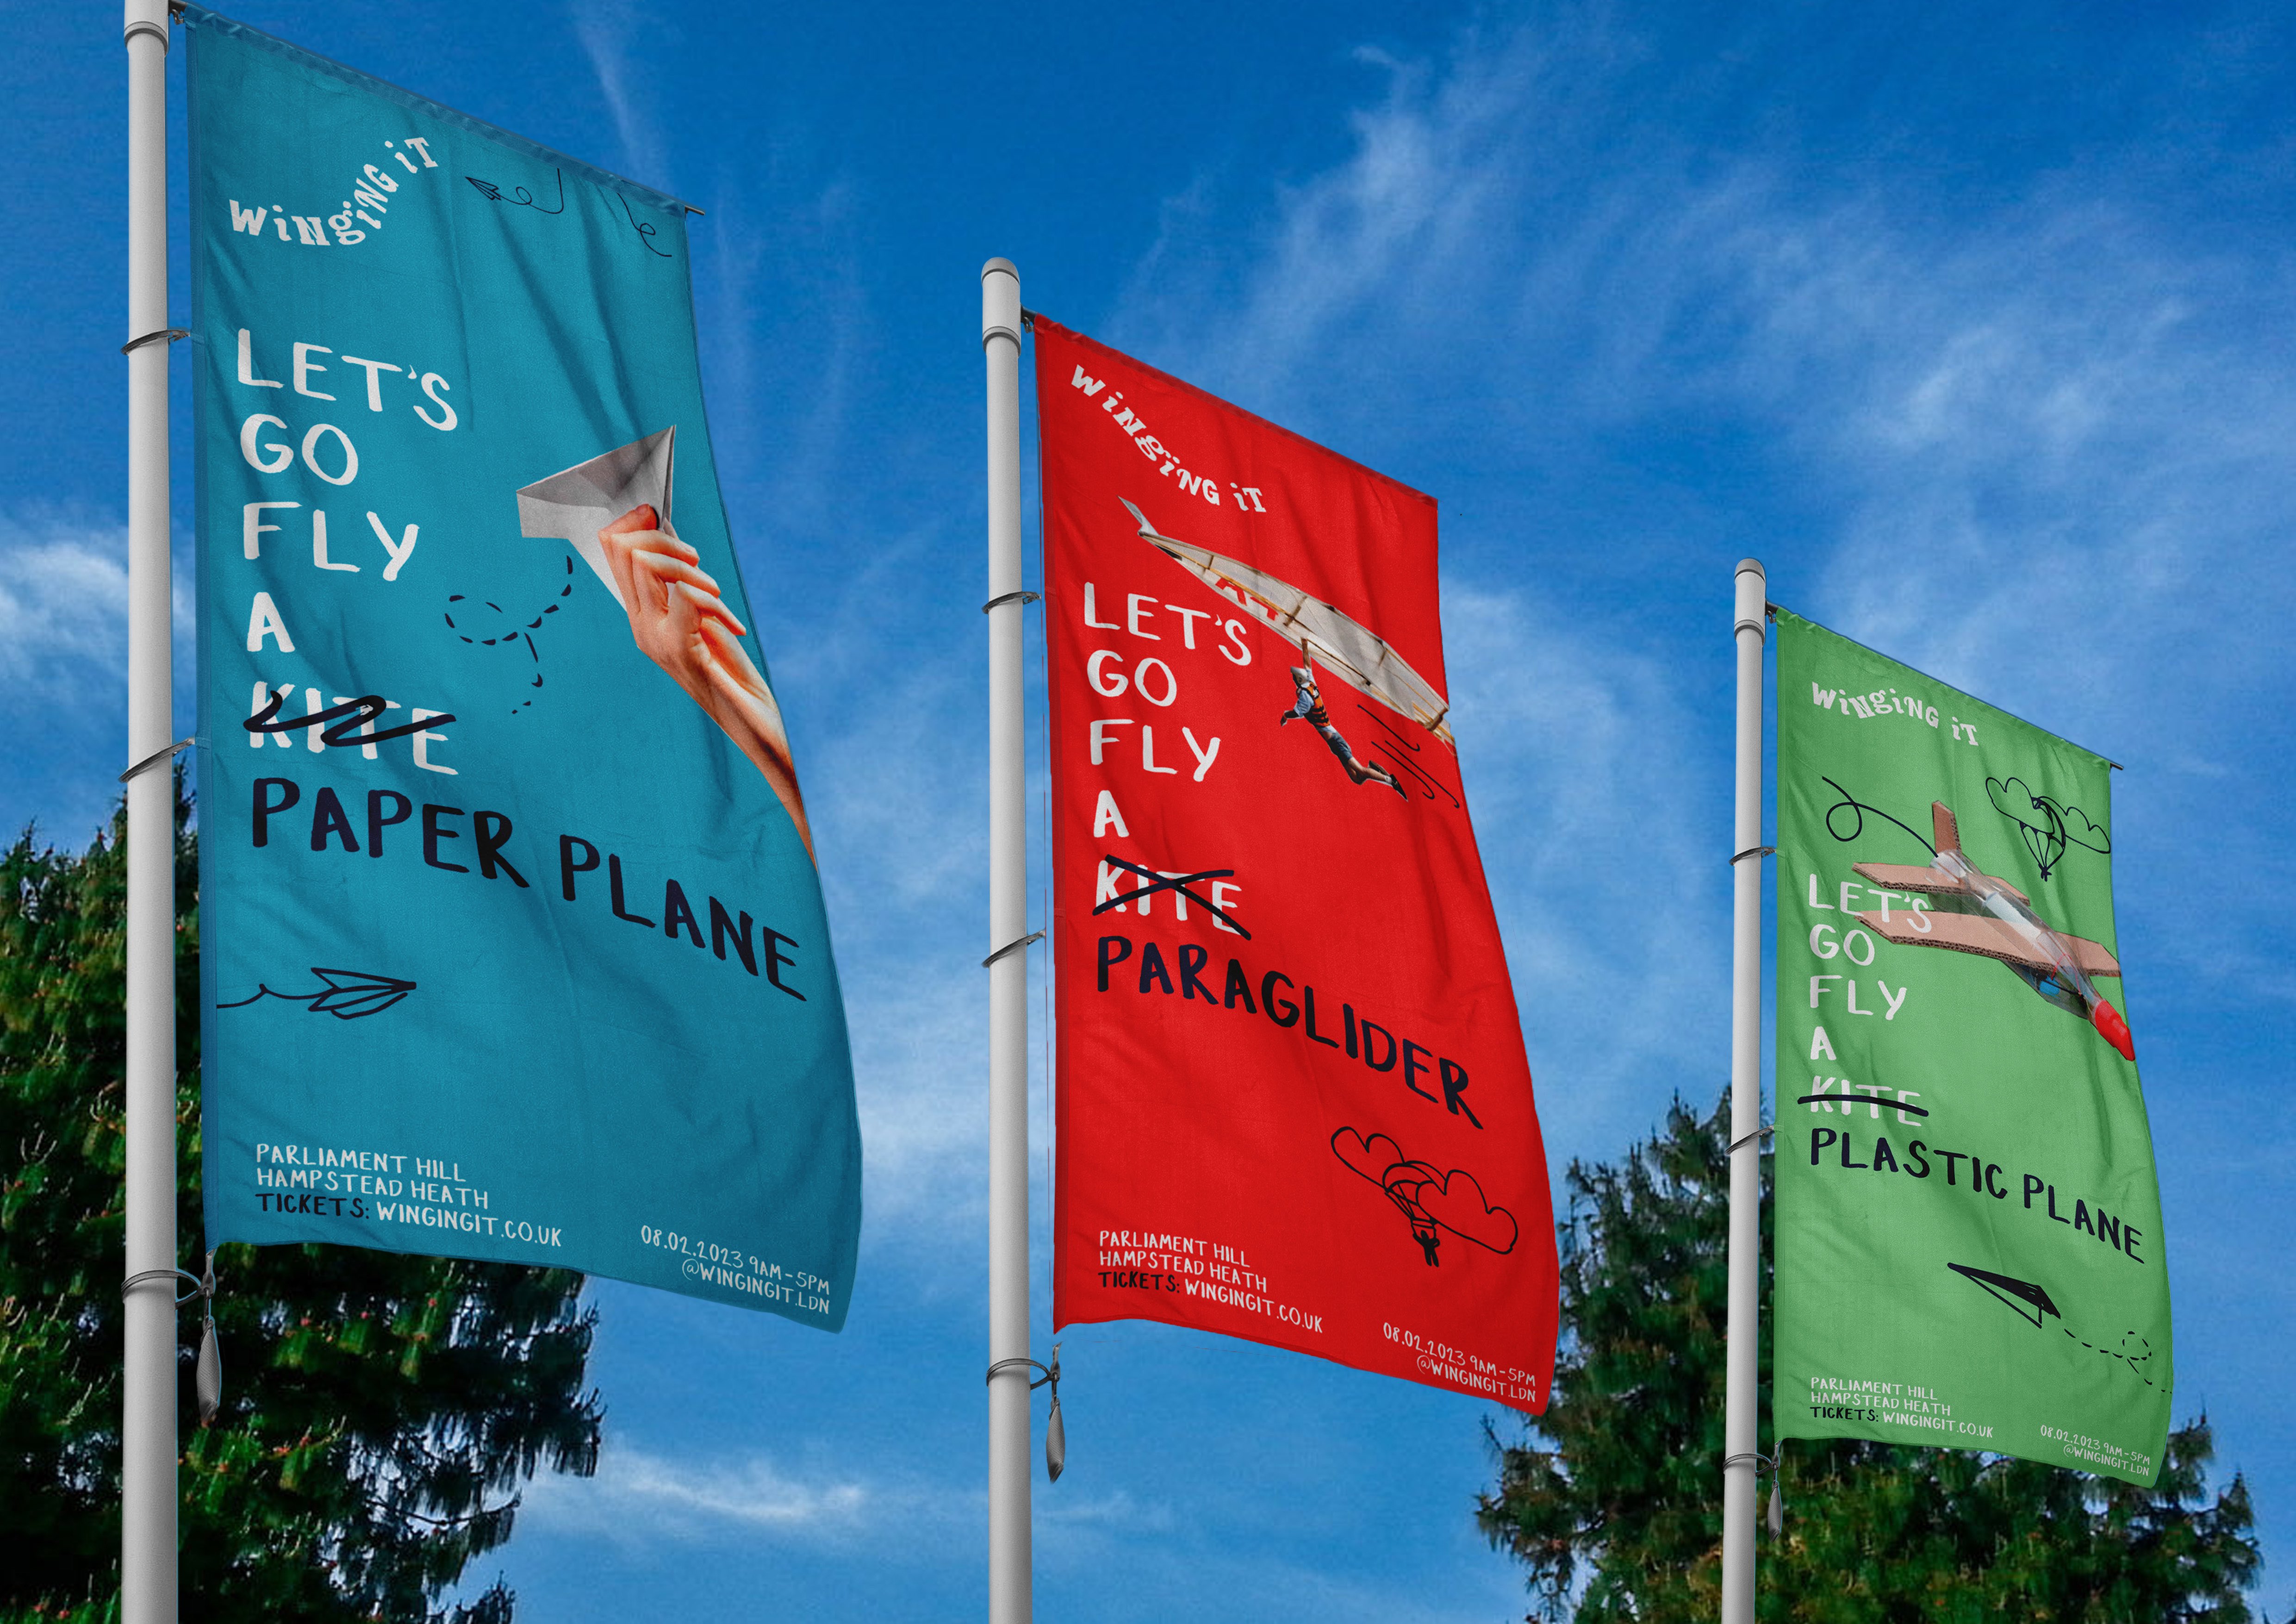 Three flag banners displaying different items that could be flown at winging it, using bright colours, illustration, and the event tagline.